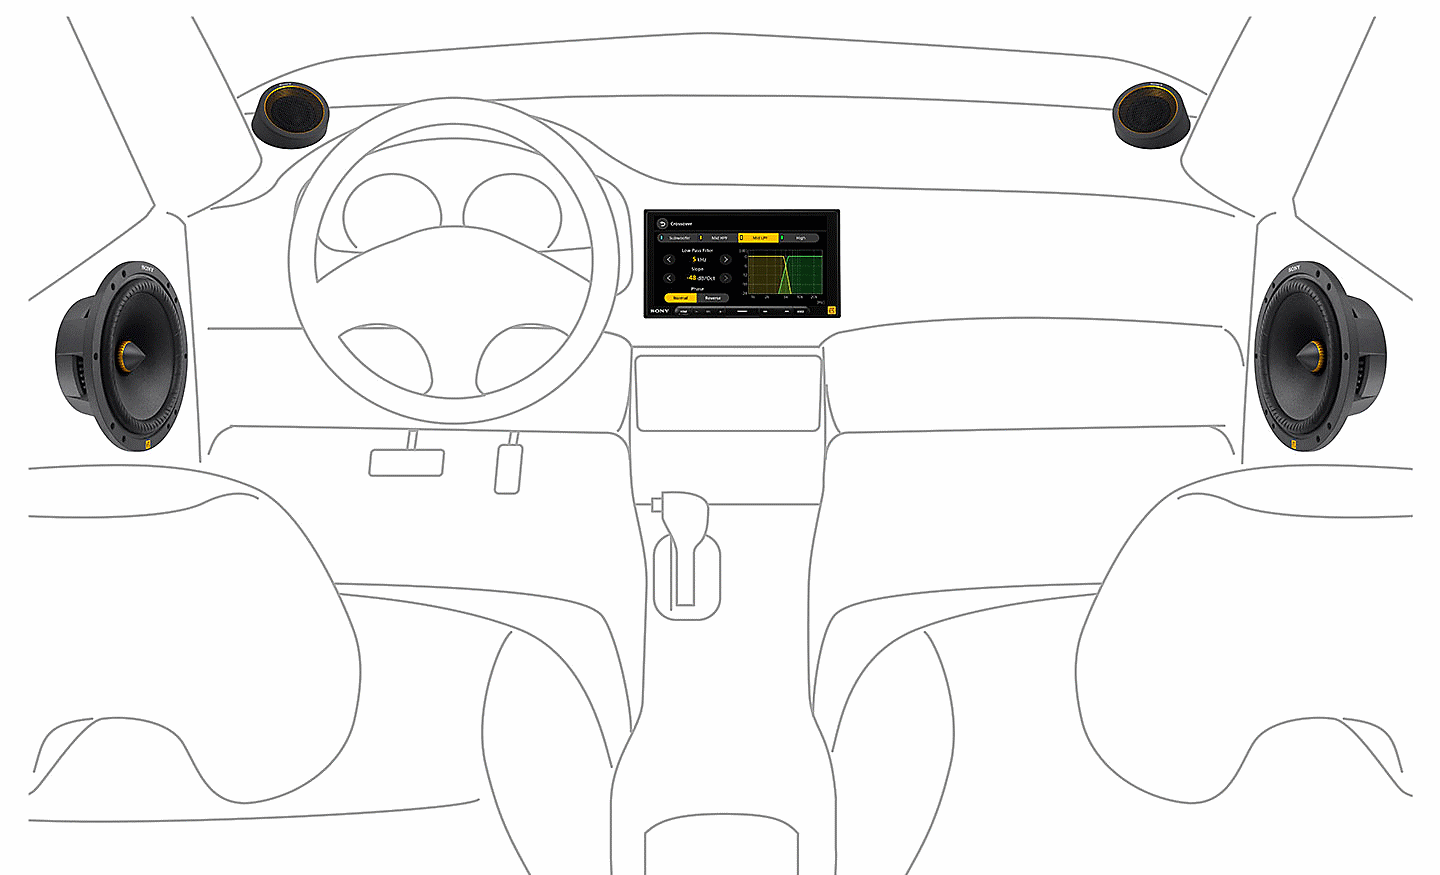 Line drawing of car interior that shows two dashboard speakers, two door speakers and the XAV-9000ES in the middle.